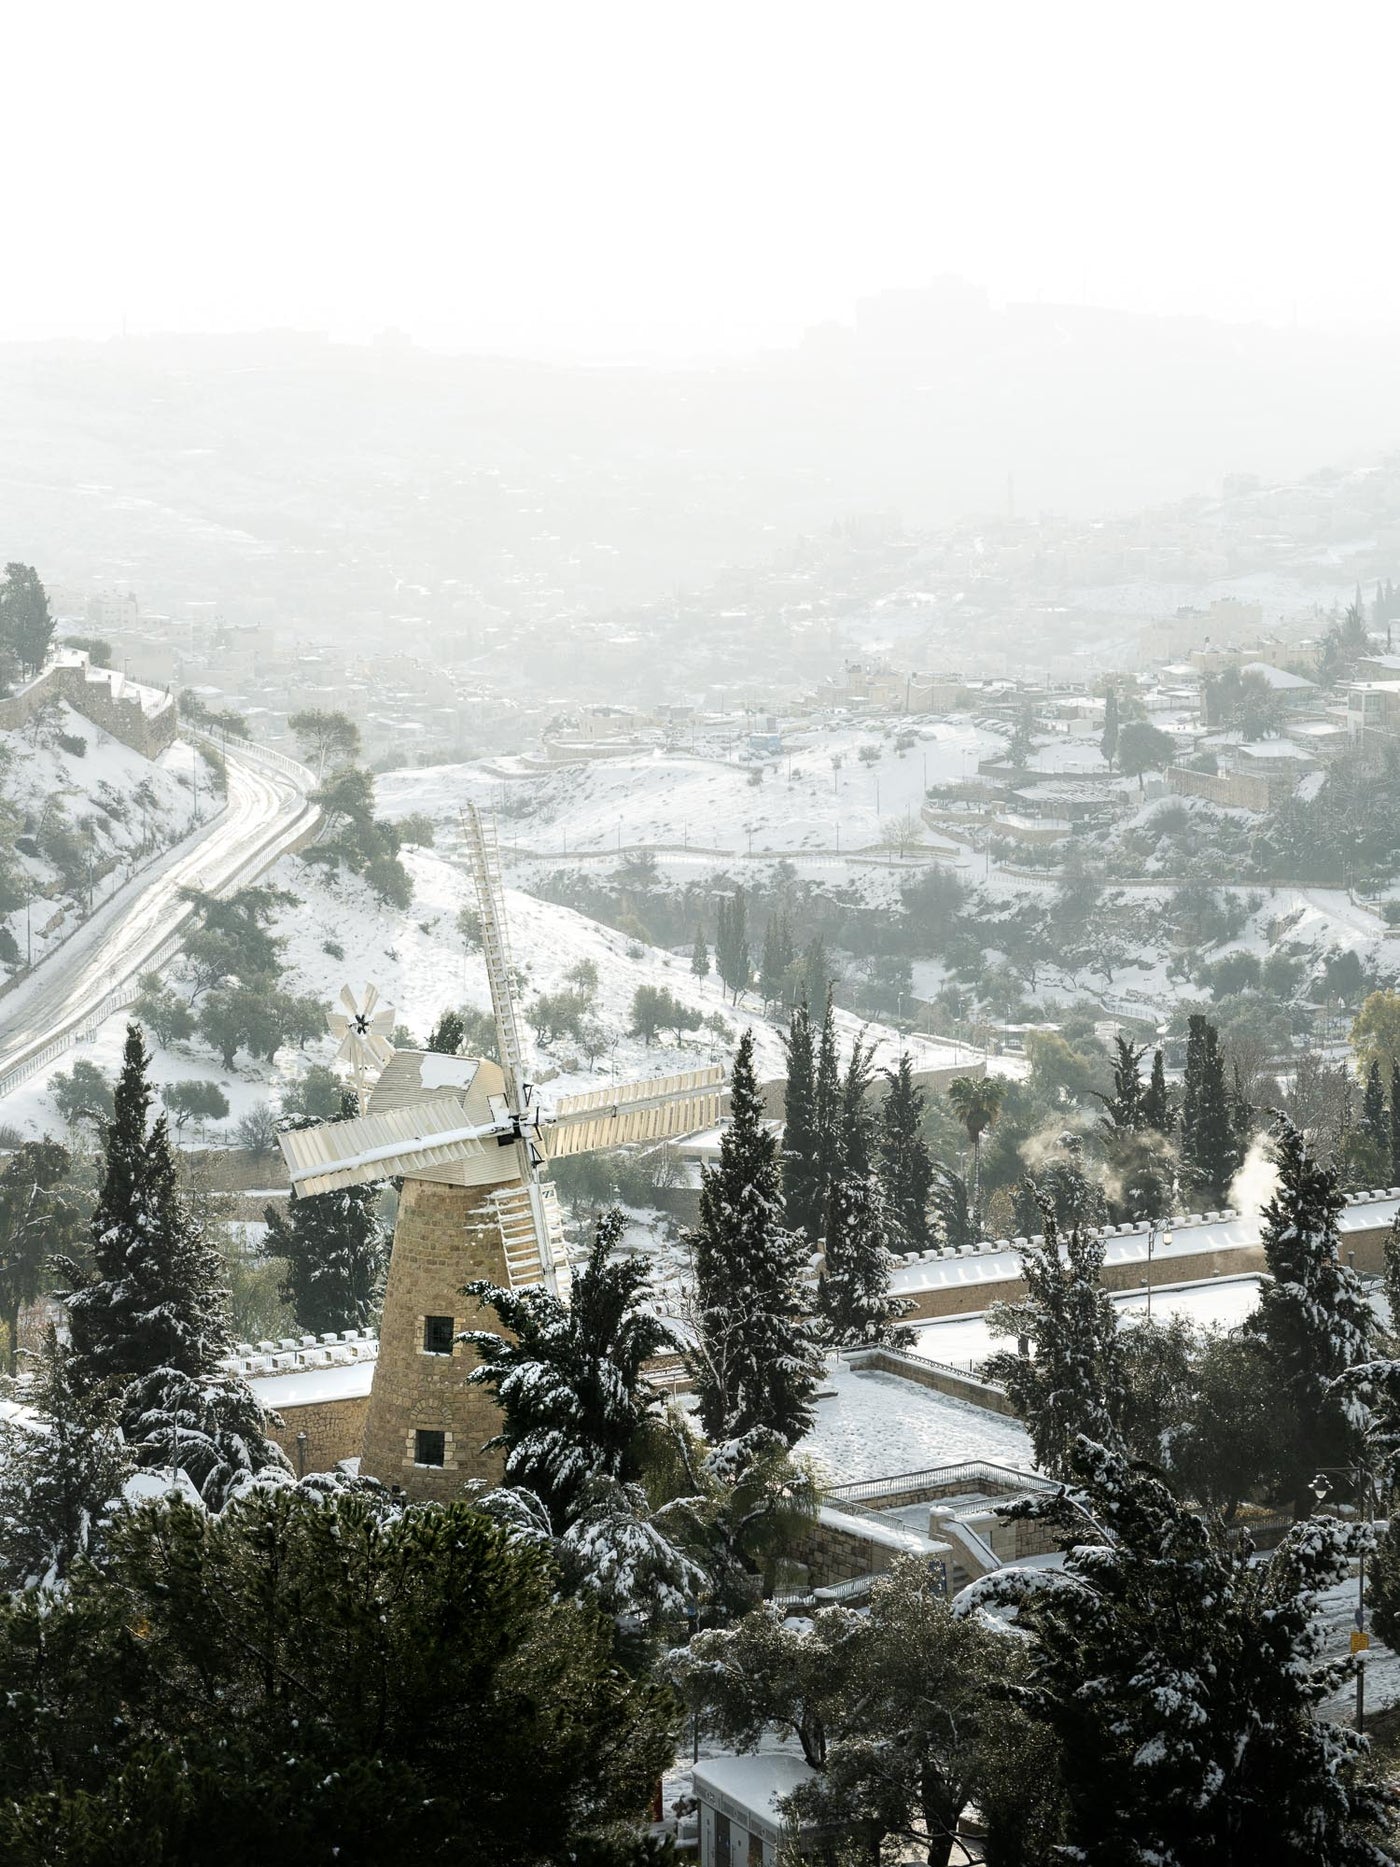 Stillness - By Yehoshua Aryeh - Photograph of Israel - Jerusalem Covered in Snow